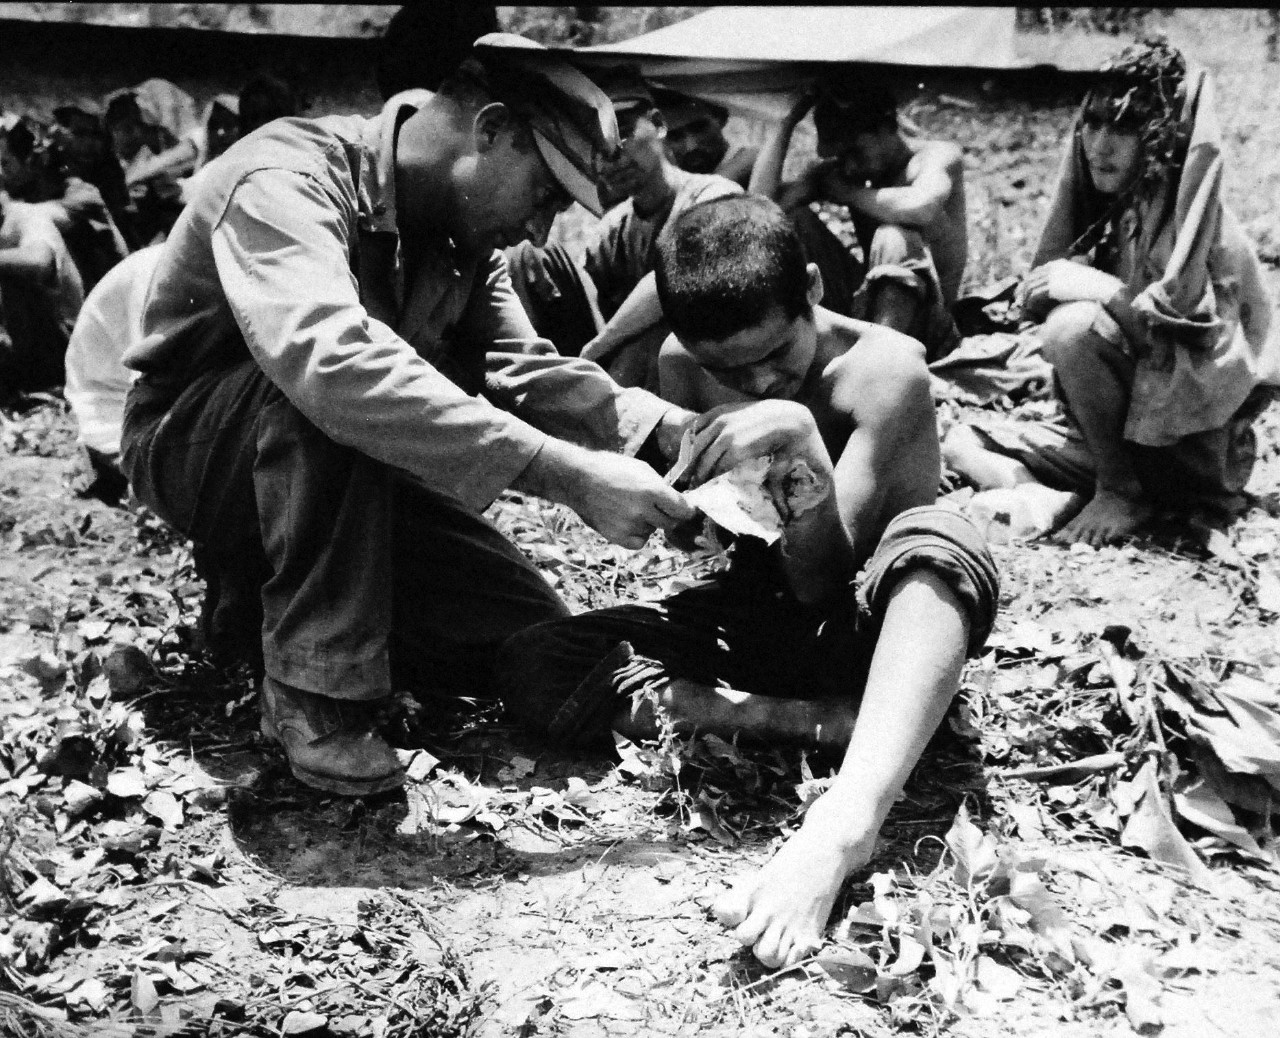 127-GW-666-128701:  Okinawa Campaign, April-June 1945.   Sixth Marine Division doctor bandages an arm wounded on a Japanese Prisoner of War taken in south of Okinawa, 1945.  Official U.S. Marine Photograph, now in the collection of the National Archives.  (2014/7/23). 